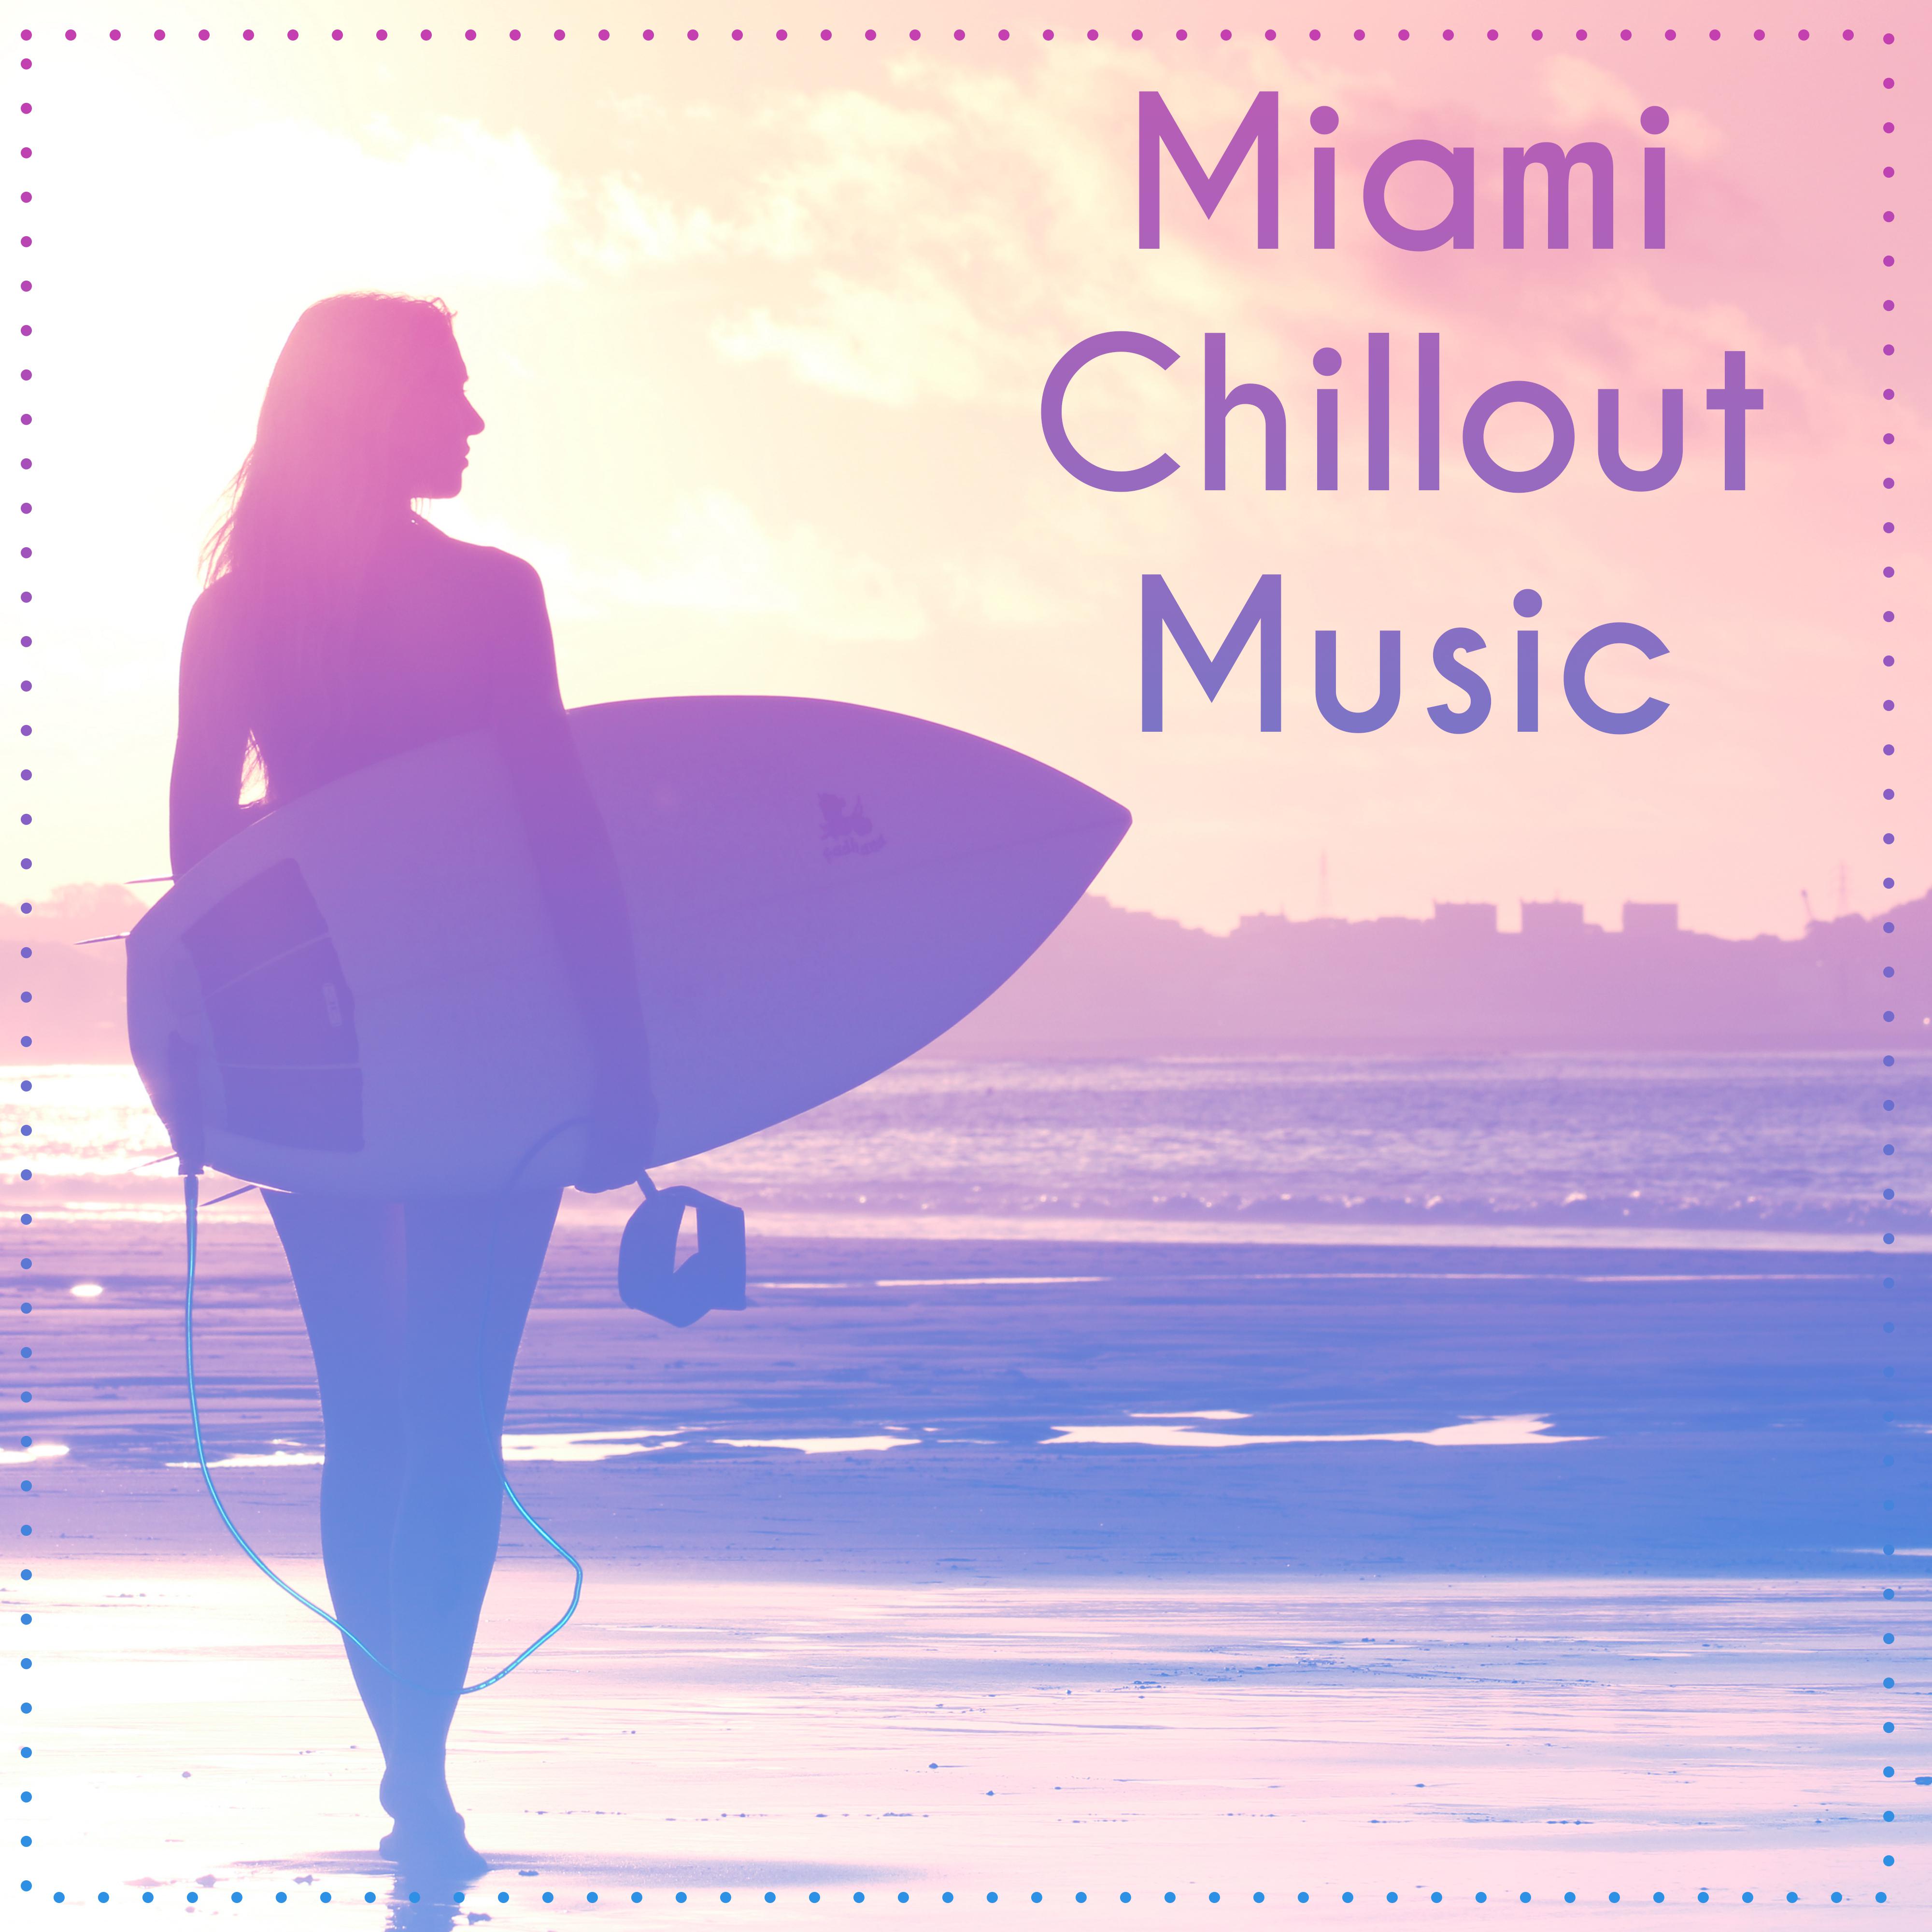 Miami Chillout Music  Relaxing Sounds of Chill Out, Journey with Soft Music, Relax Yourself, Summer Time Sounds